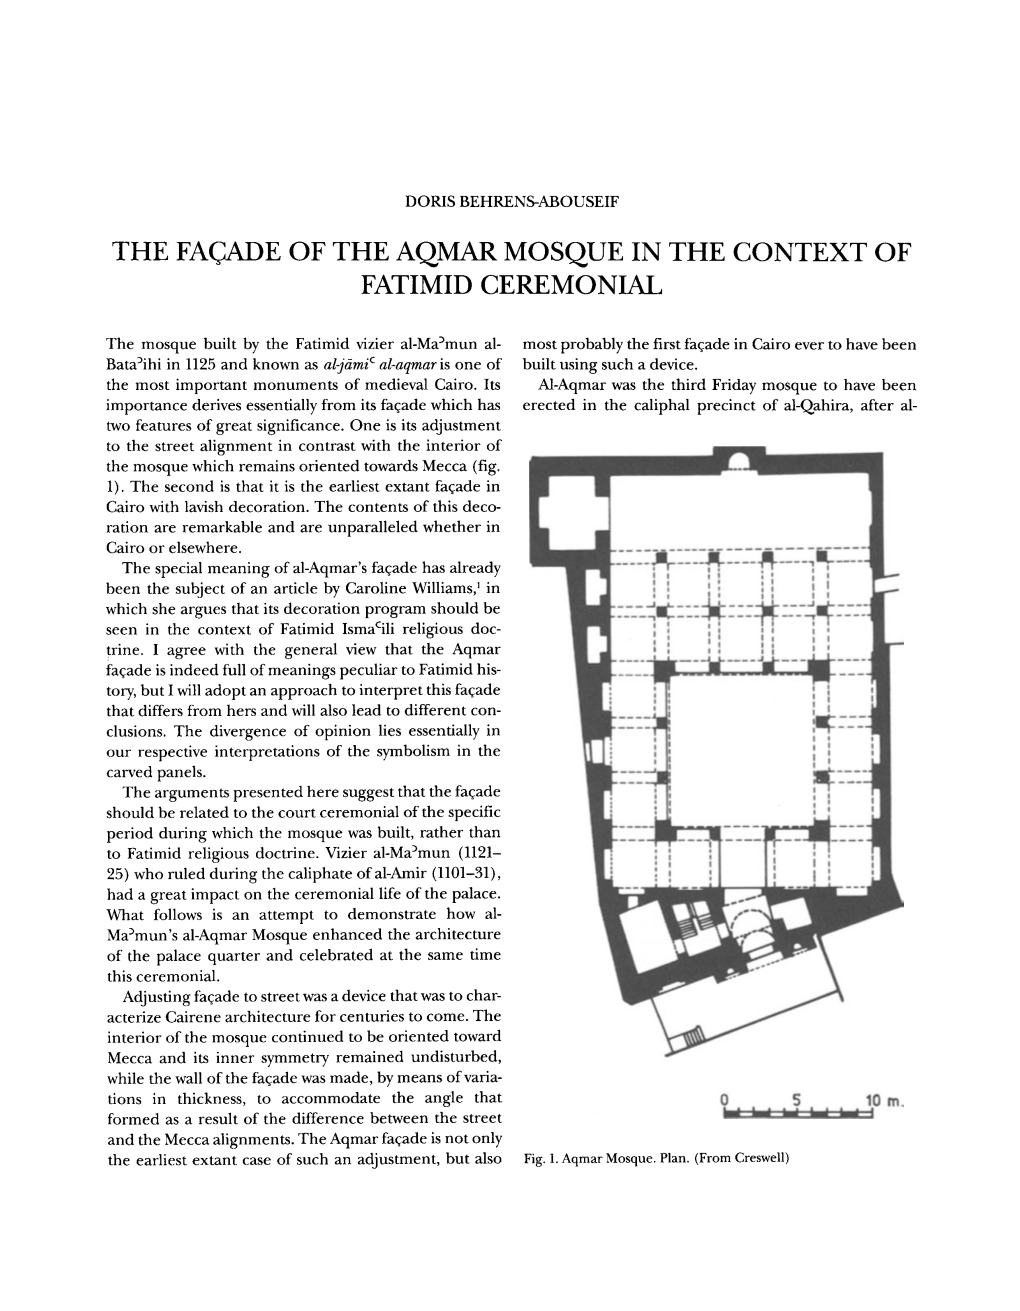 The Facaj)E of the Aqmar Mosque in the Context of Fatimid Ceremonial